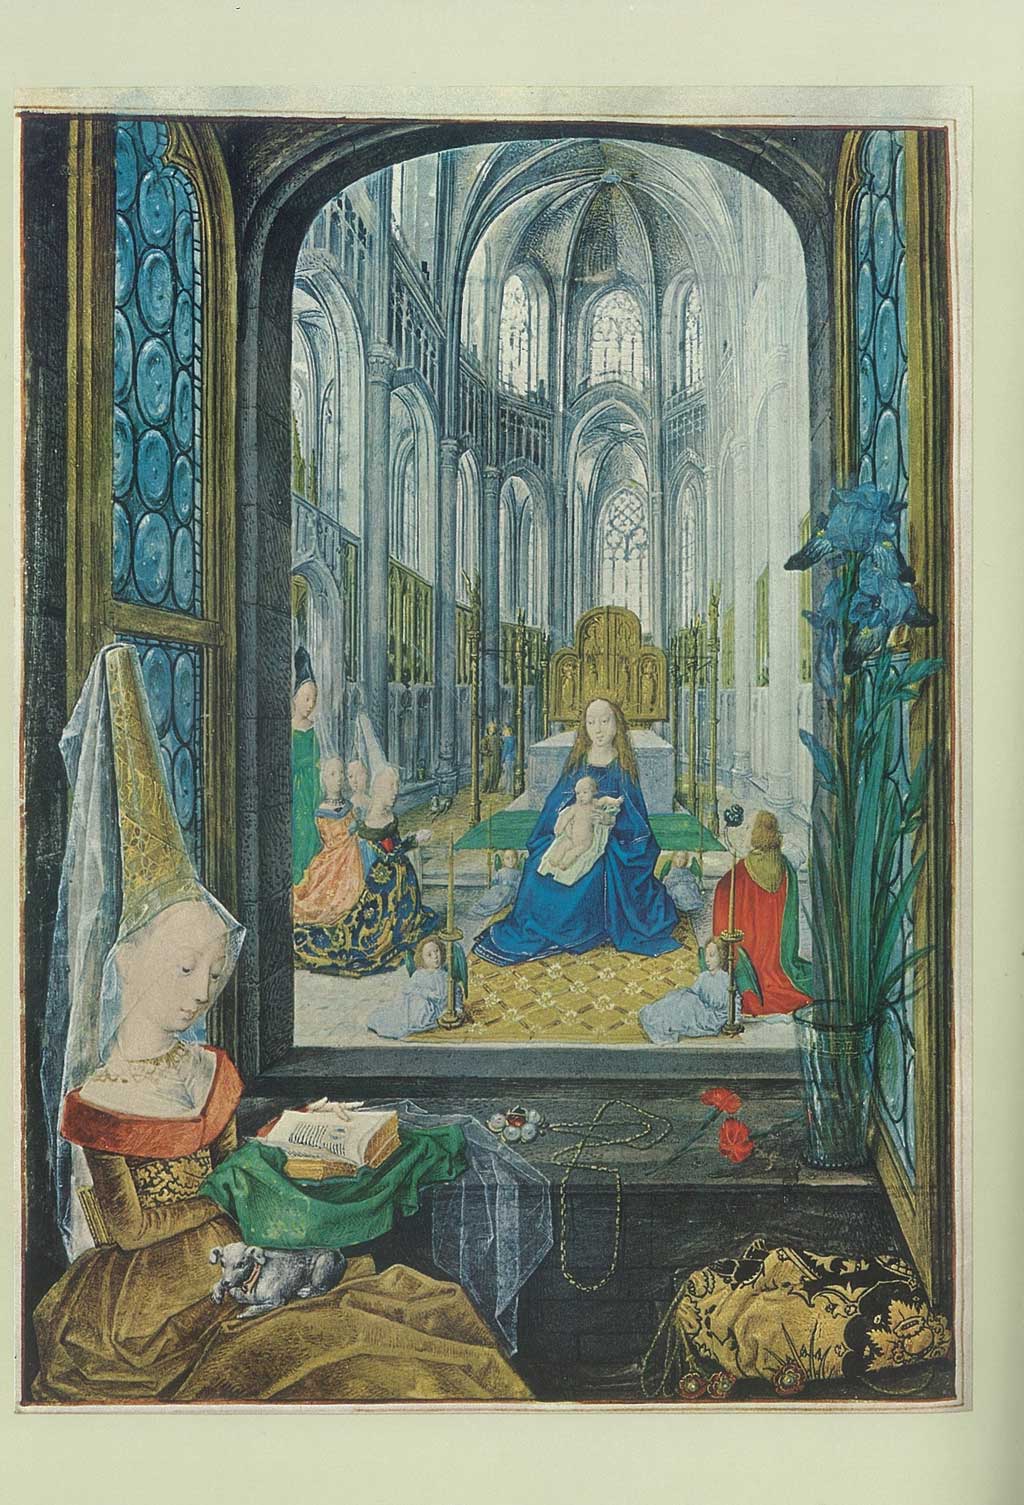 Painting of a woman reading a book, sitting in front of a miniature depiction of Mary with the child Jesus on her lap.